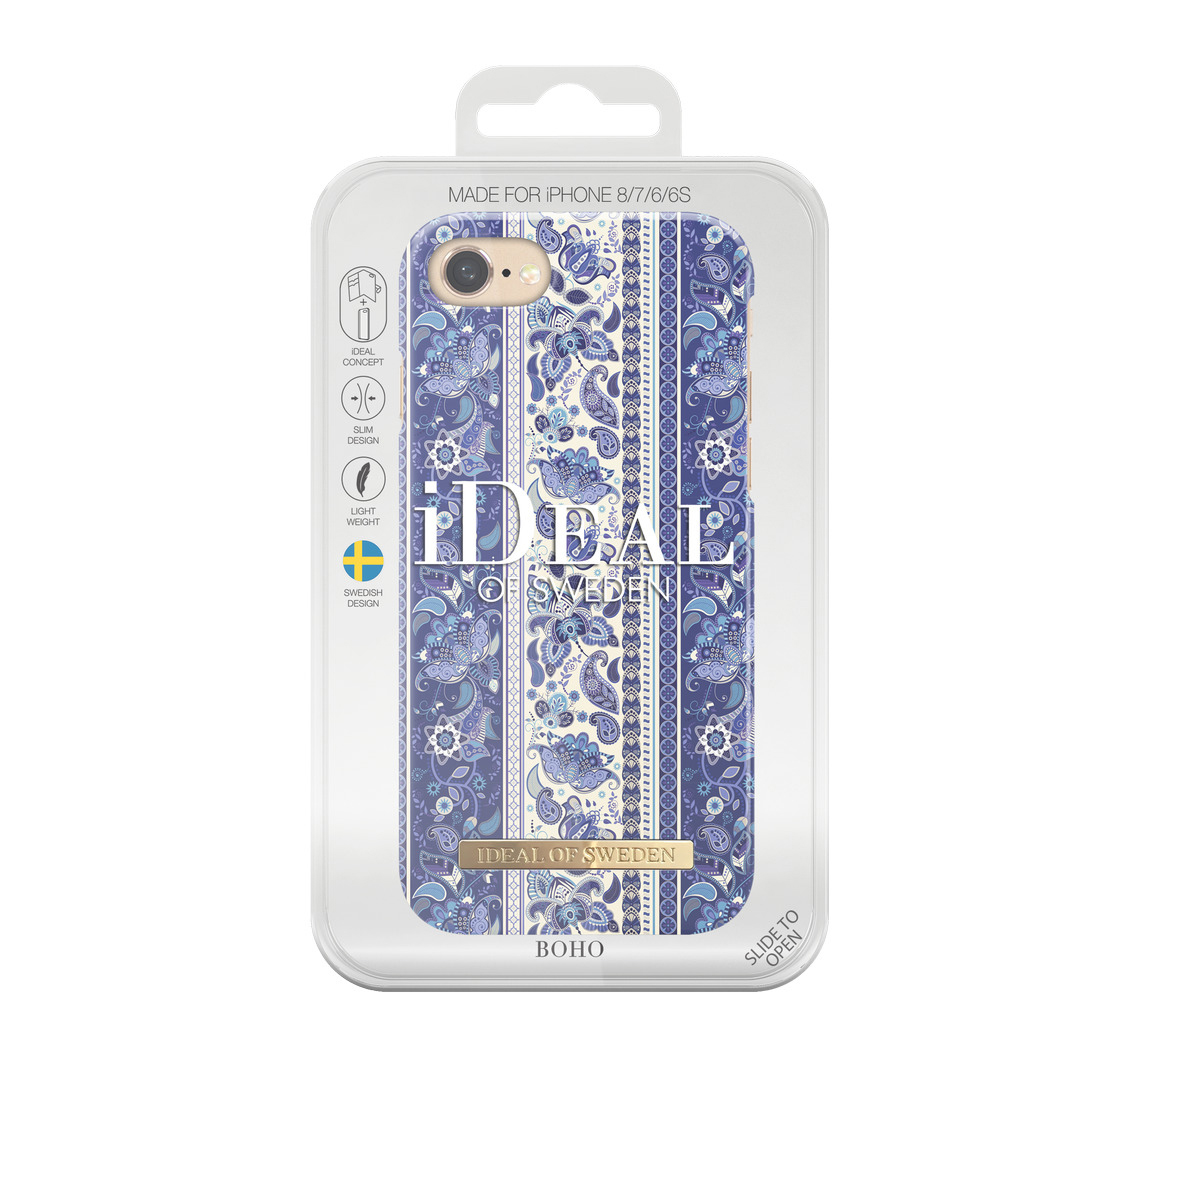 IDEAL OF SWEDEN Backcover, 7, iPhone iPhone iPhone Fashion, Apple, 8, Boho 6